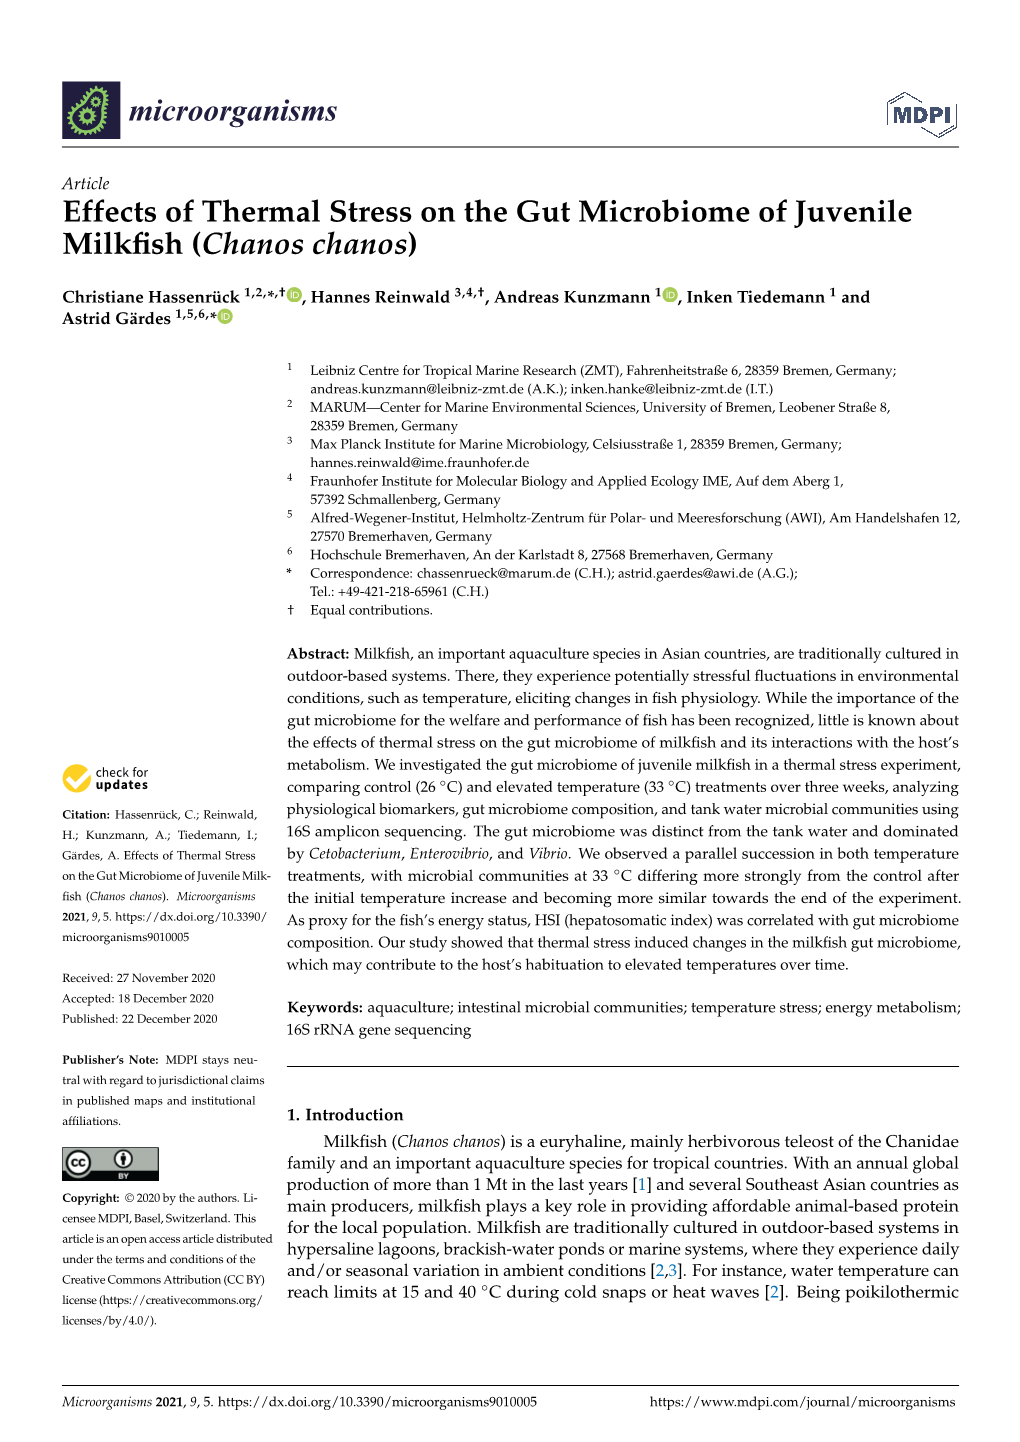 Effects of Thermal Stress on the Gut Microbiome of Juvenile Milkfish